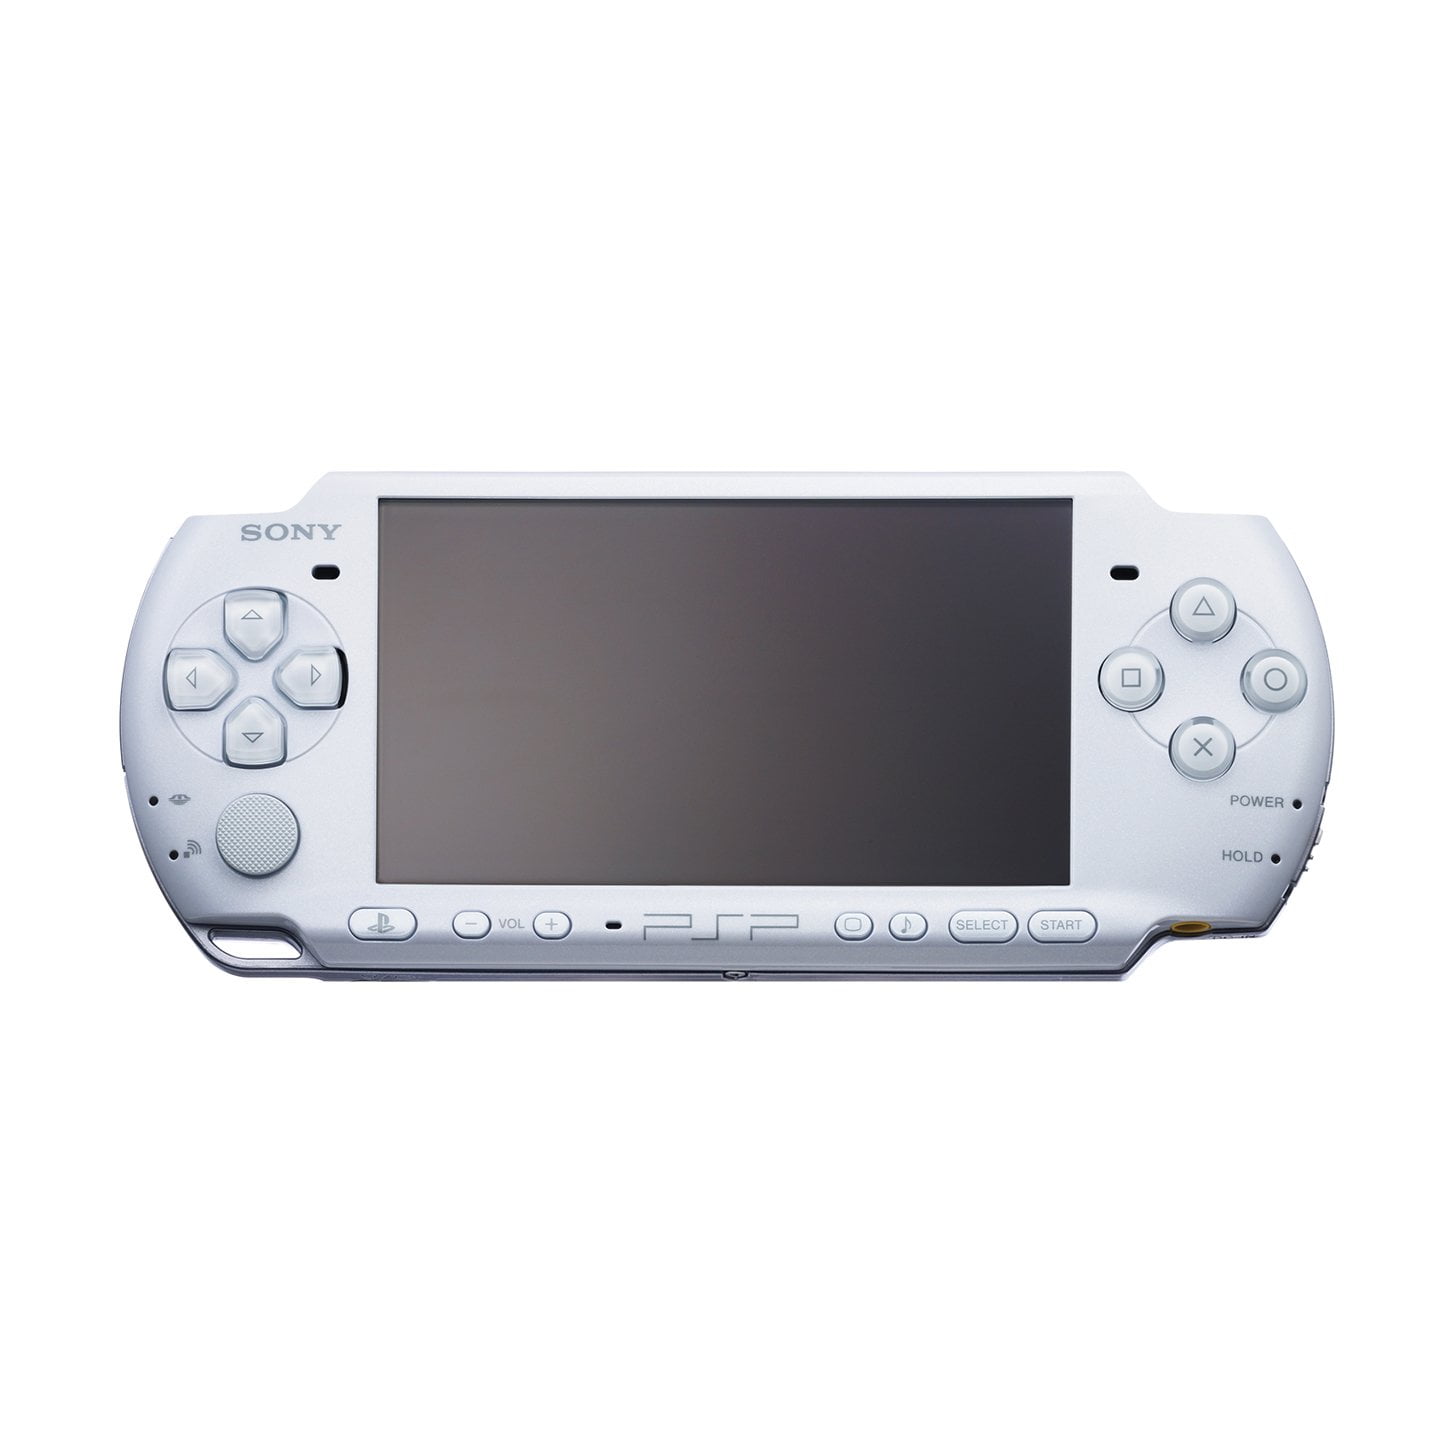  Sony PSP Slim and Lite 3000 Series Handheld Gaming Console with  2 Batteries (Renewed) (White/Blue) : Videojuegos